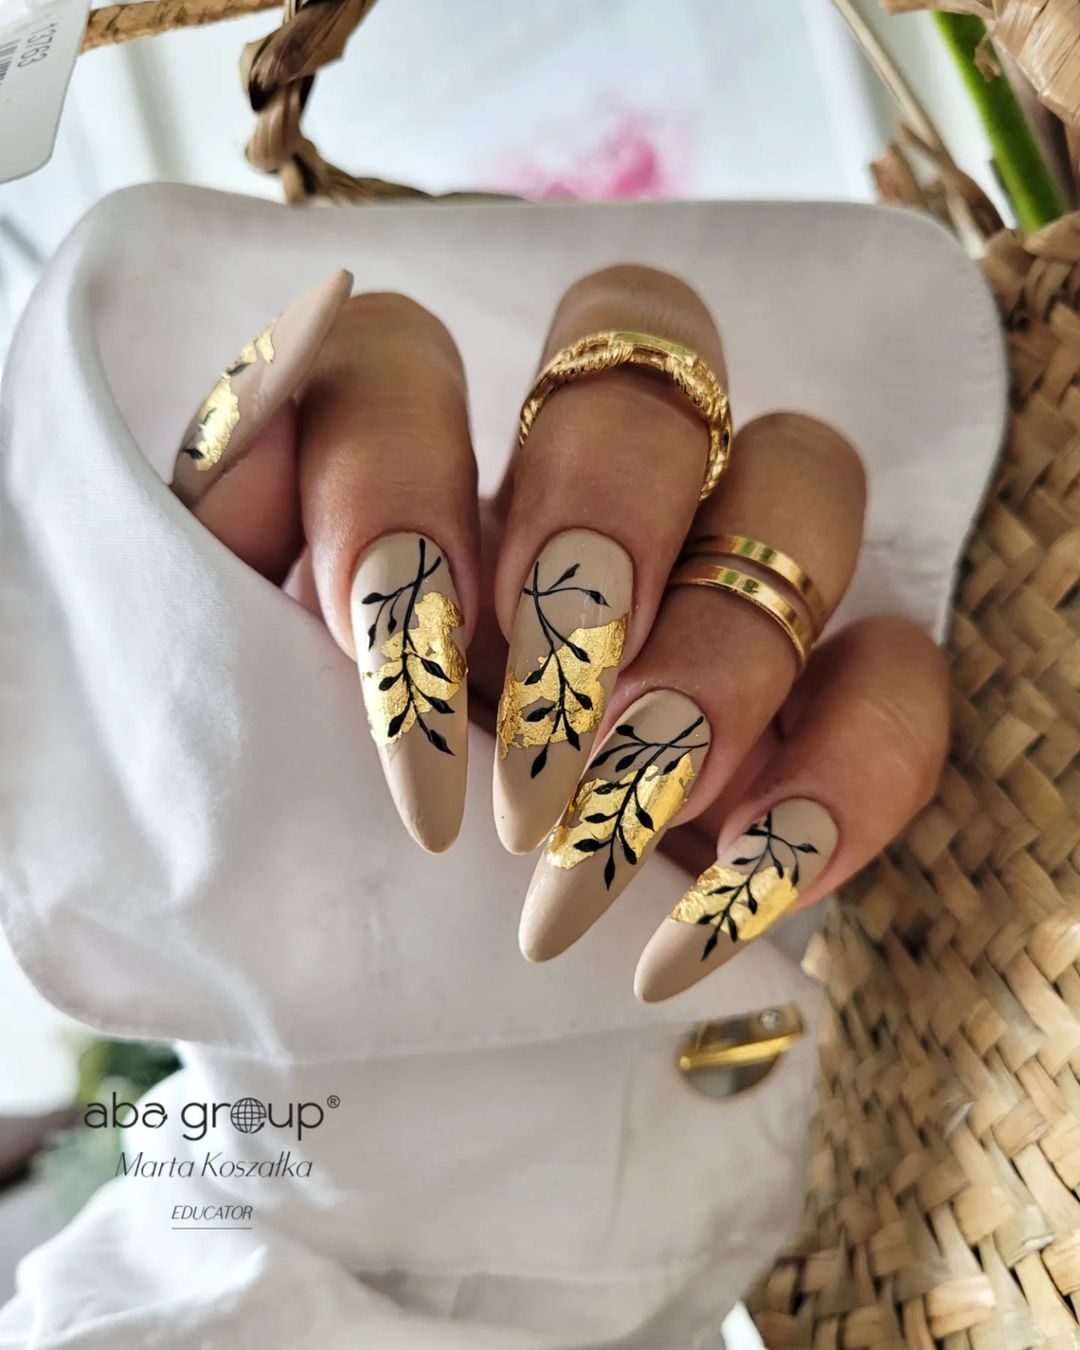 Long Gray Gel Nails with Gold Foil Design